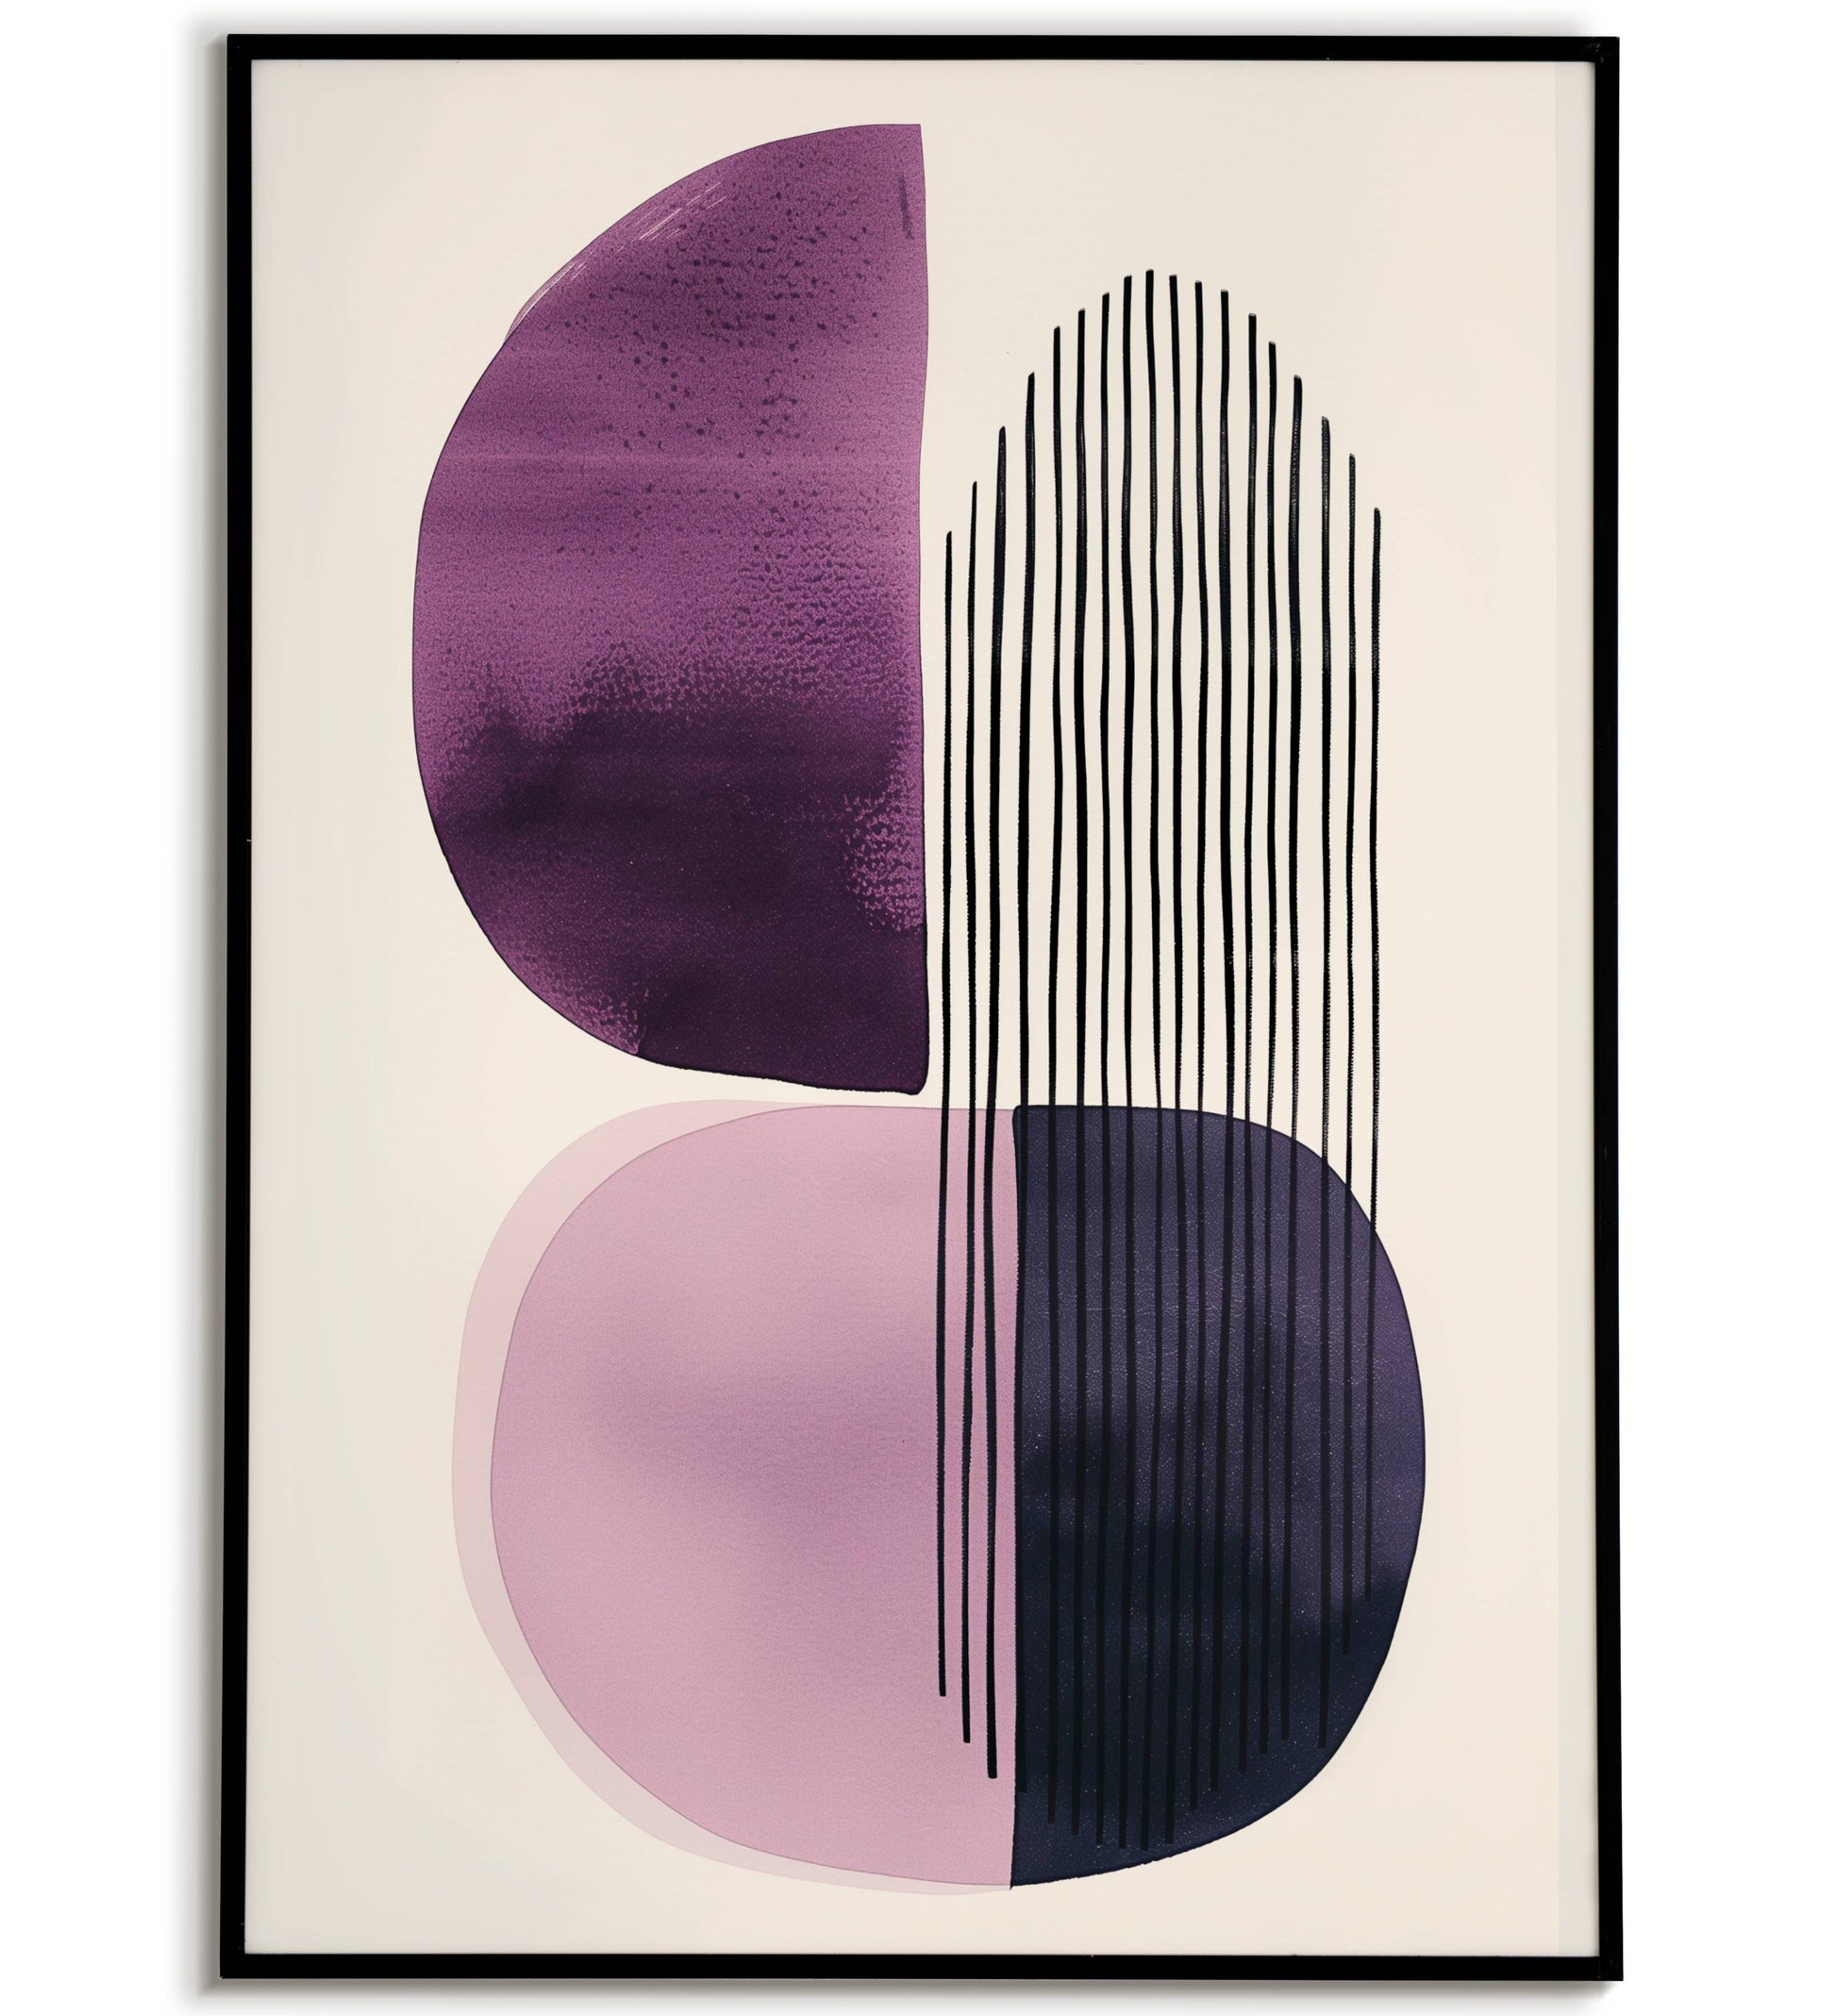 Abstract poster. Modern and thought-provoking artwork with an emphasis on shape and color.